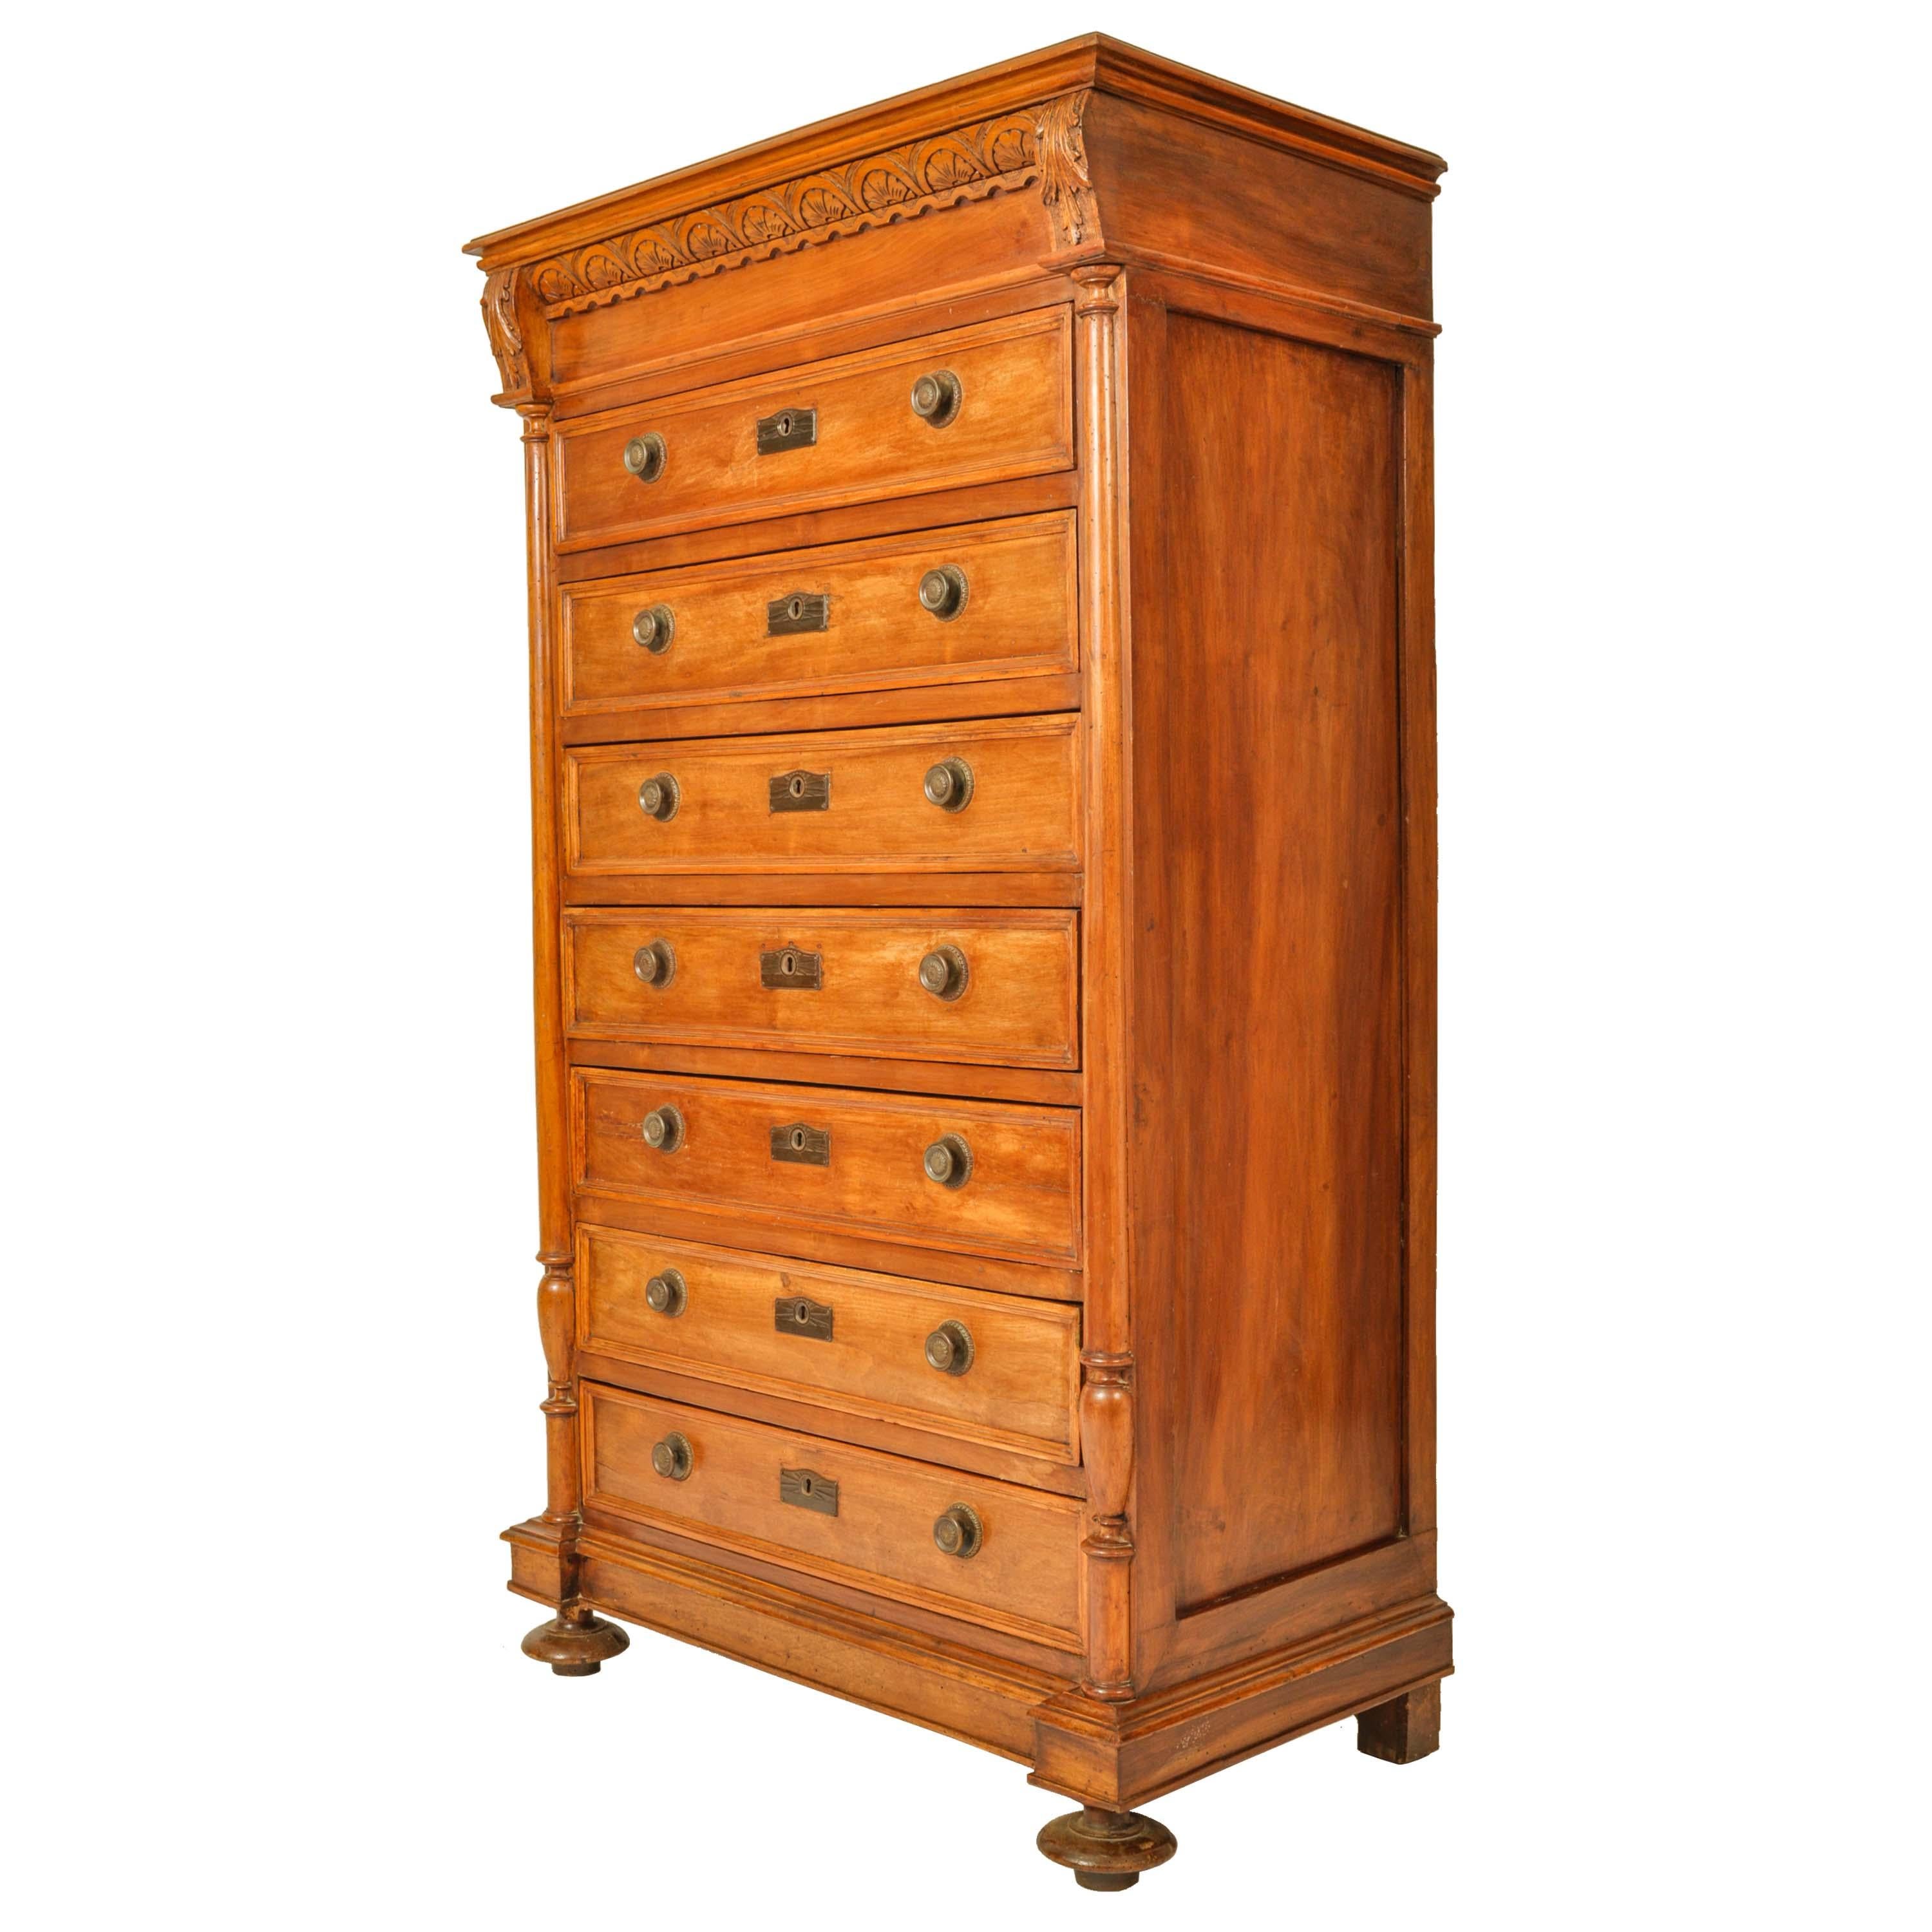 A very good antique French cherry wood Louis XVI semainier (seven drawer) chest dresser, circa 1880.
The top of the chest has a carved 'fan' shaped gallery flanked by a pair of carved acanthus leaf brackets, the chest having ring turned half